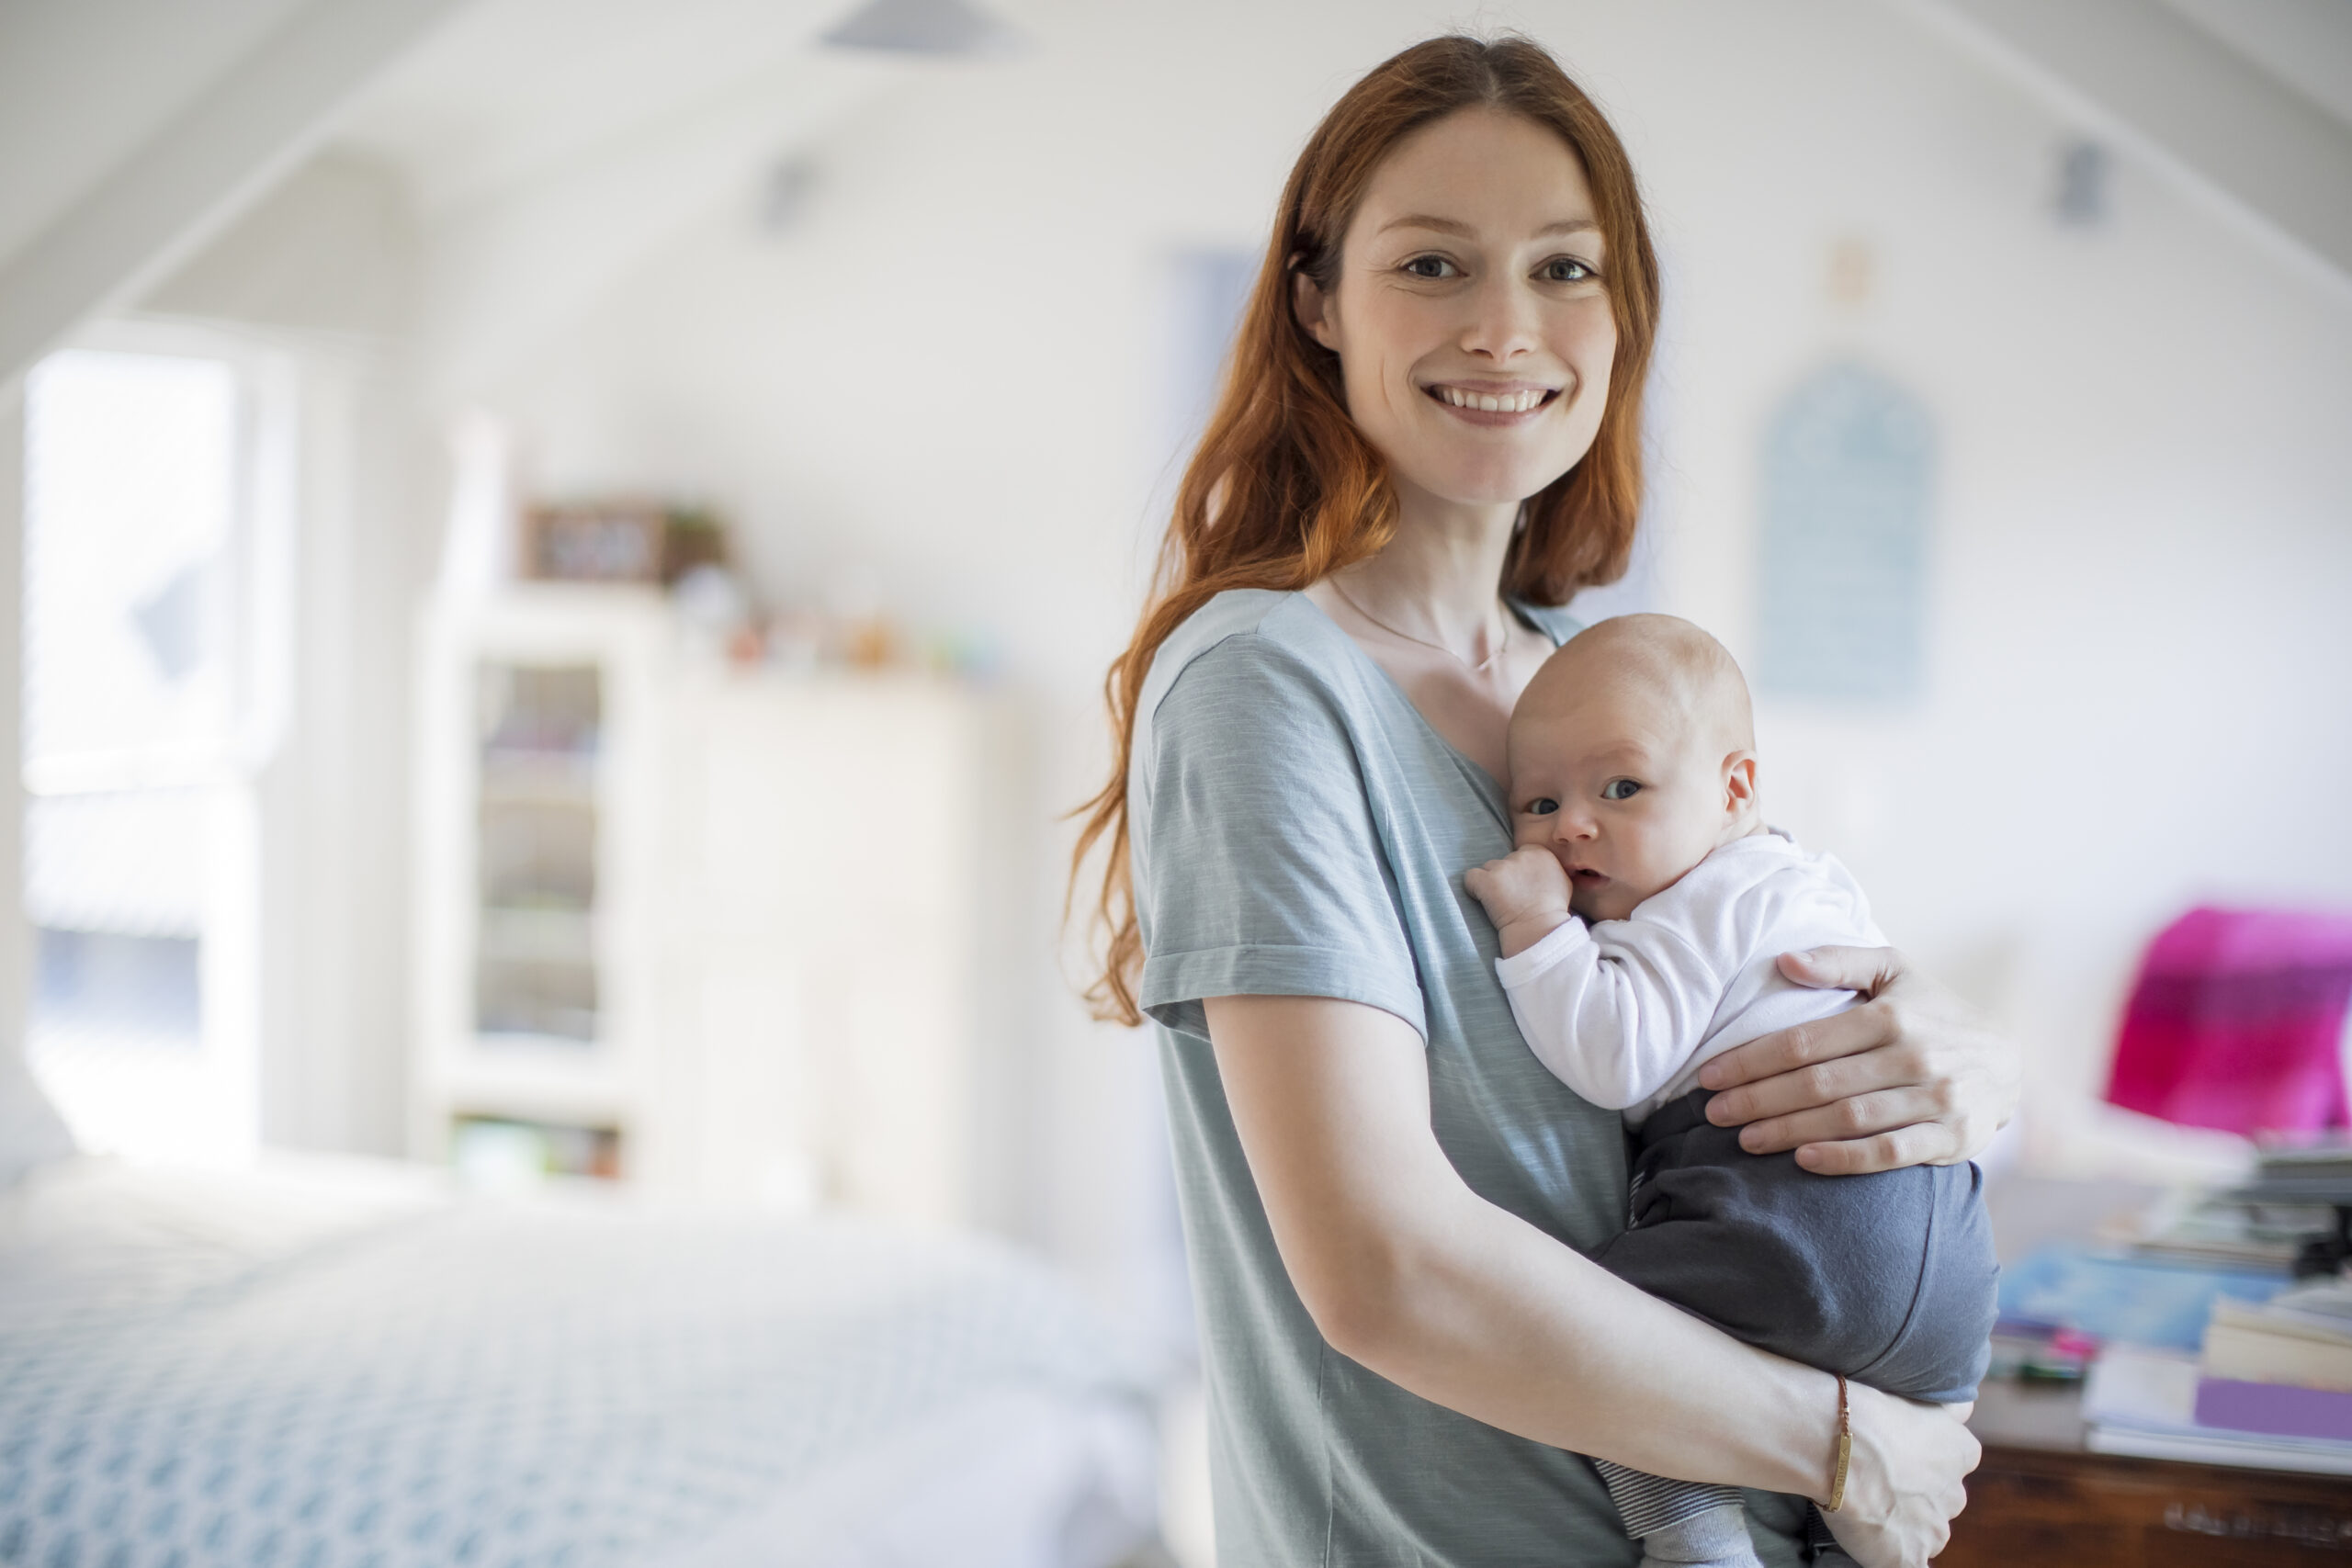 Smiling redhead mother carrying son at home